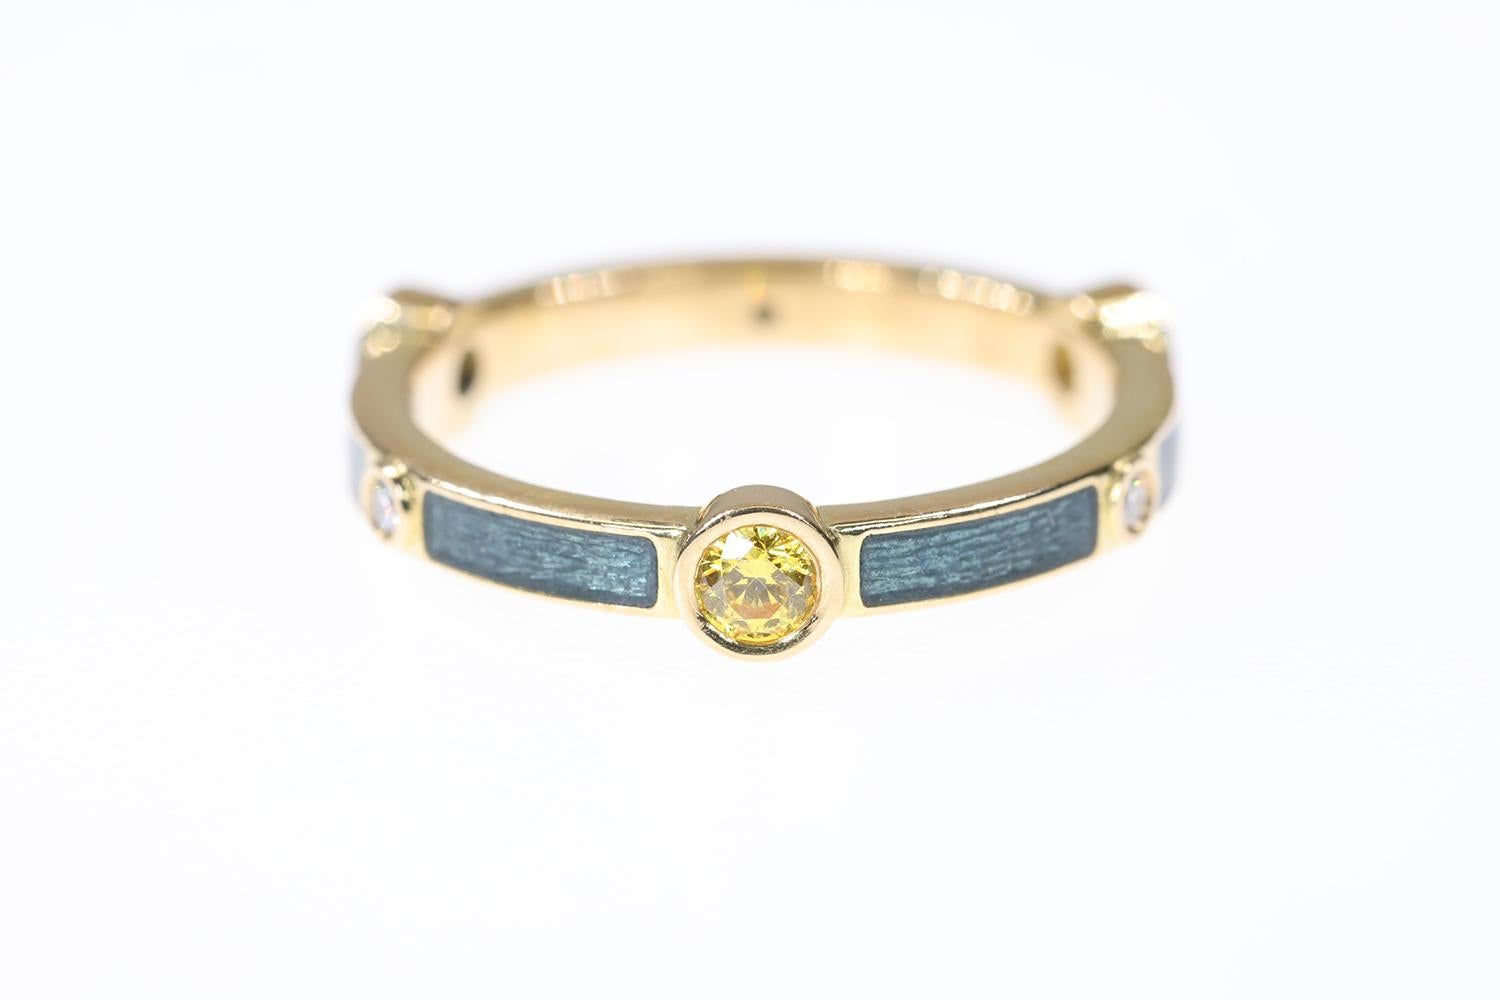 This beautifully designed Yellow Sapphire & Diamond 18K yellow gold ring is made with the finest Yellow Sapphires, Gold Alloy, and Diamonds. The ring features 3 beautiful G/H VS1 diamonds that are 1.5mm in diameter and 3 Rich Yellow 3.0mm Sapphires.